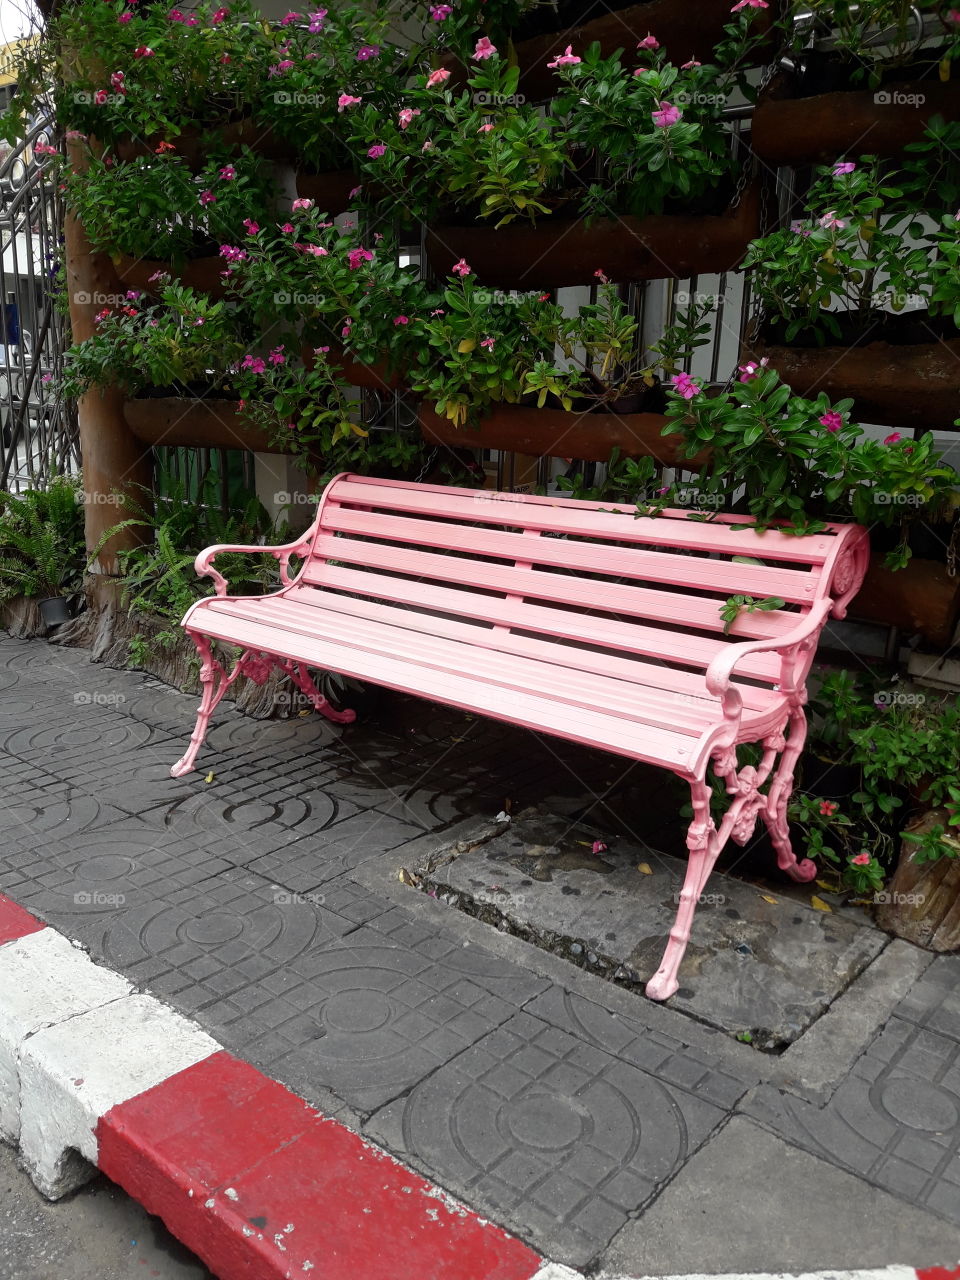 the pink longchair for person who pass this way like to sit for relax. It has beautiful flowers background. Its color is fade from strong sunlight.